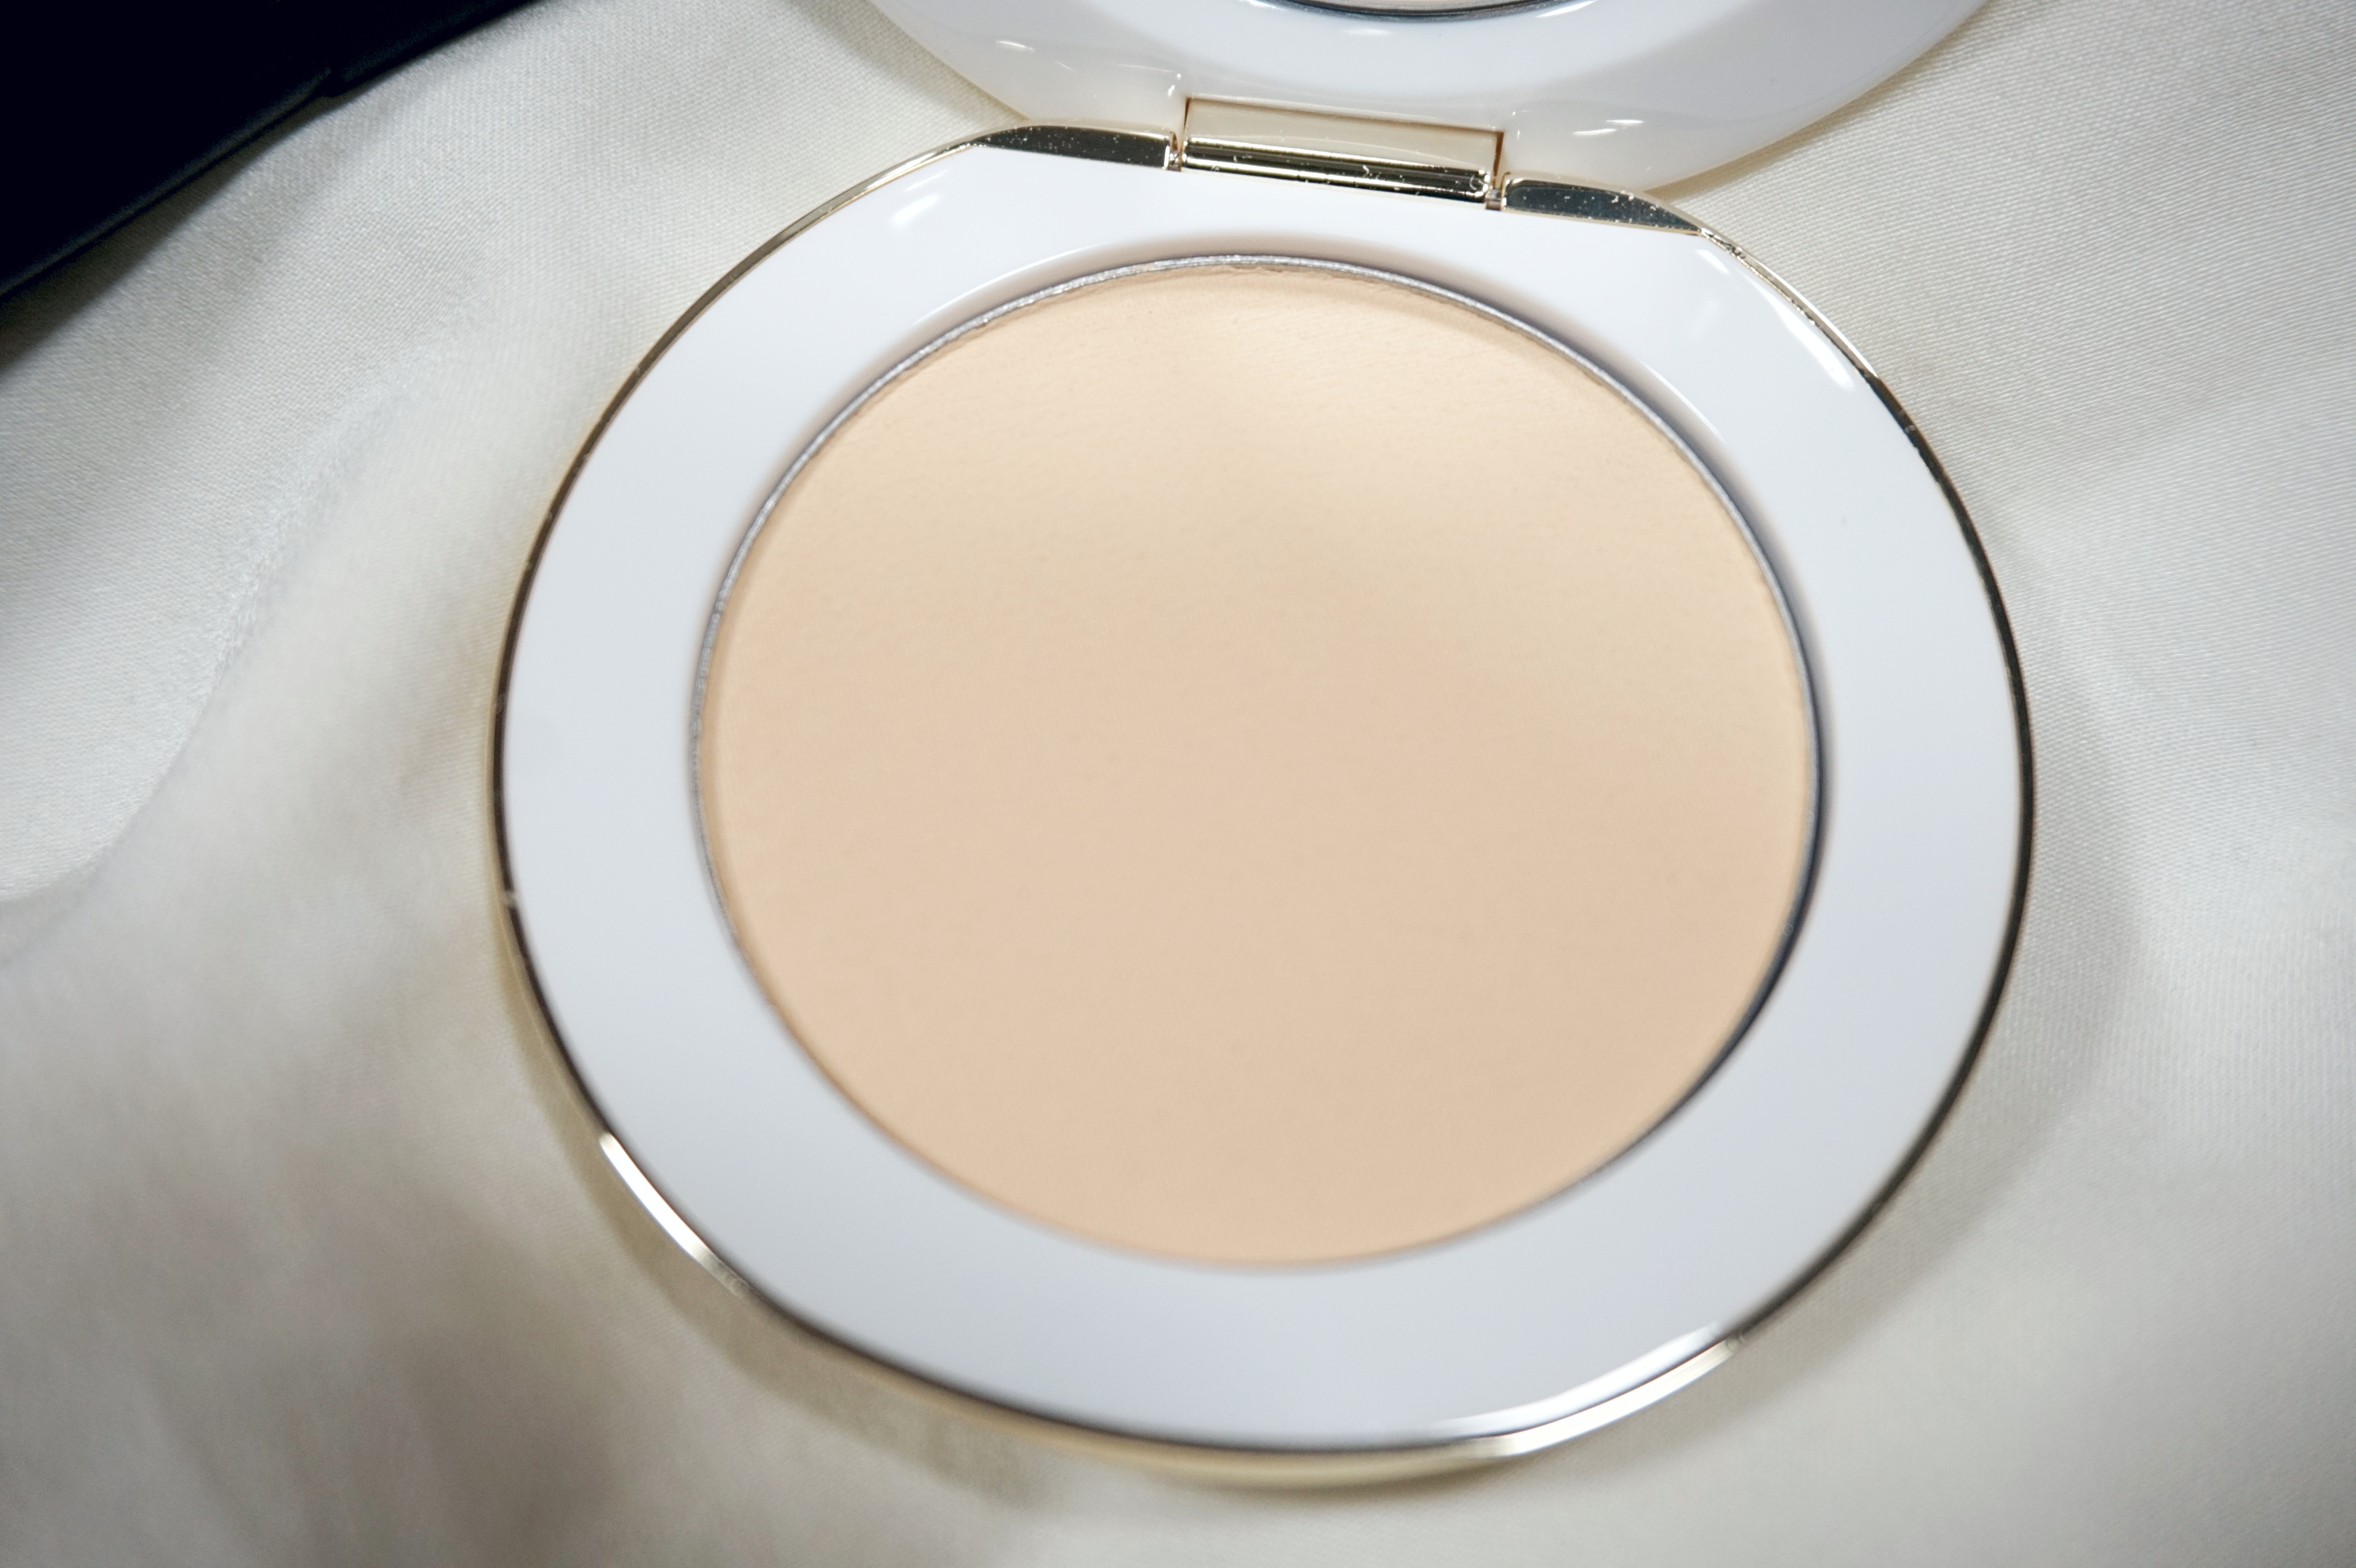 Westman Atelier Vital Pressed Skincare Blurring Talc-Free Setting Powder Review and Swatches